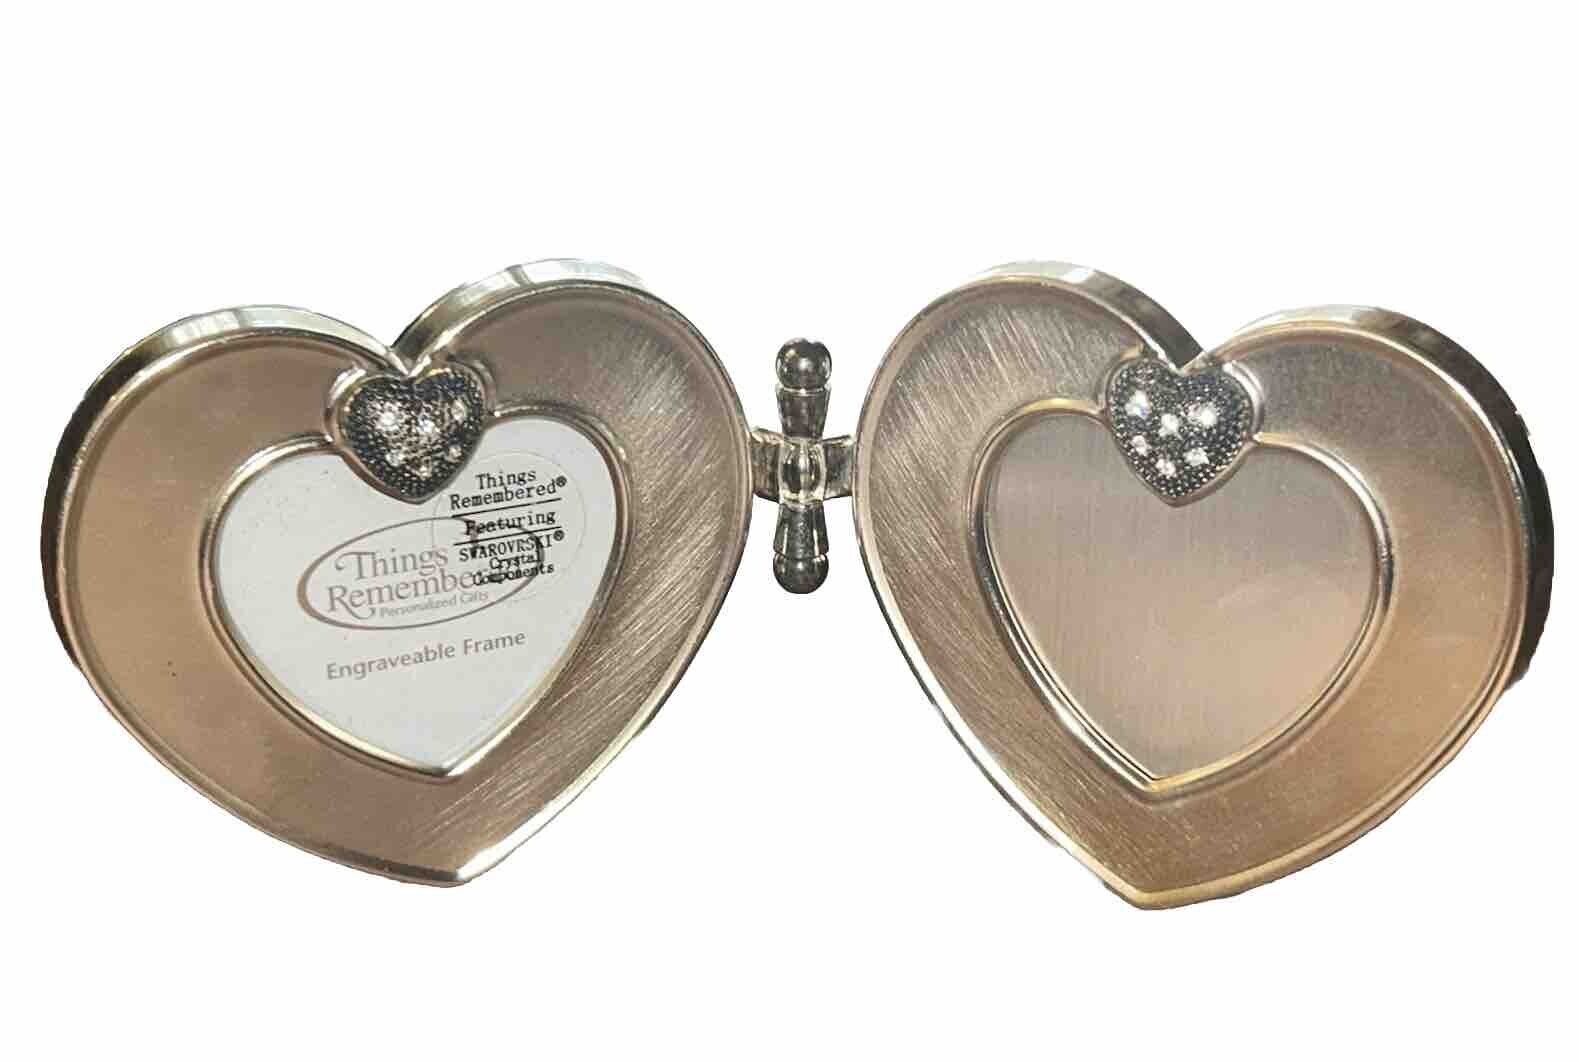 New Swarovski Double Hearts Folding Photos Frame Things Remembered 7.5”L 3.25”T